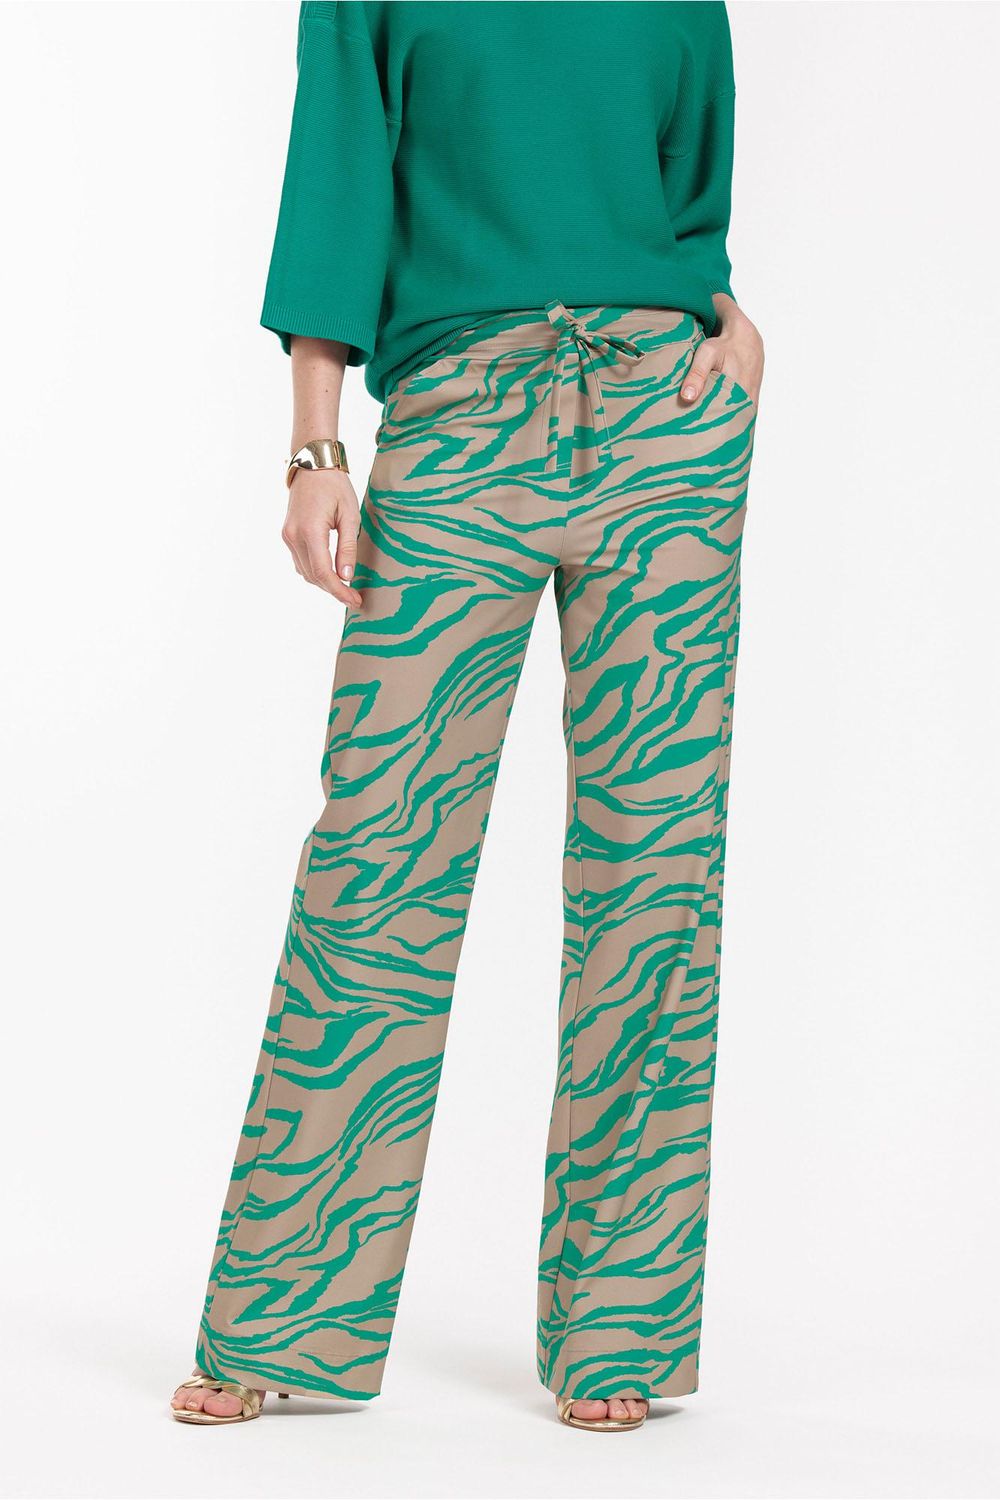 Studio Anneloes Abigail tiger trousers, smaragd/clay